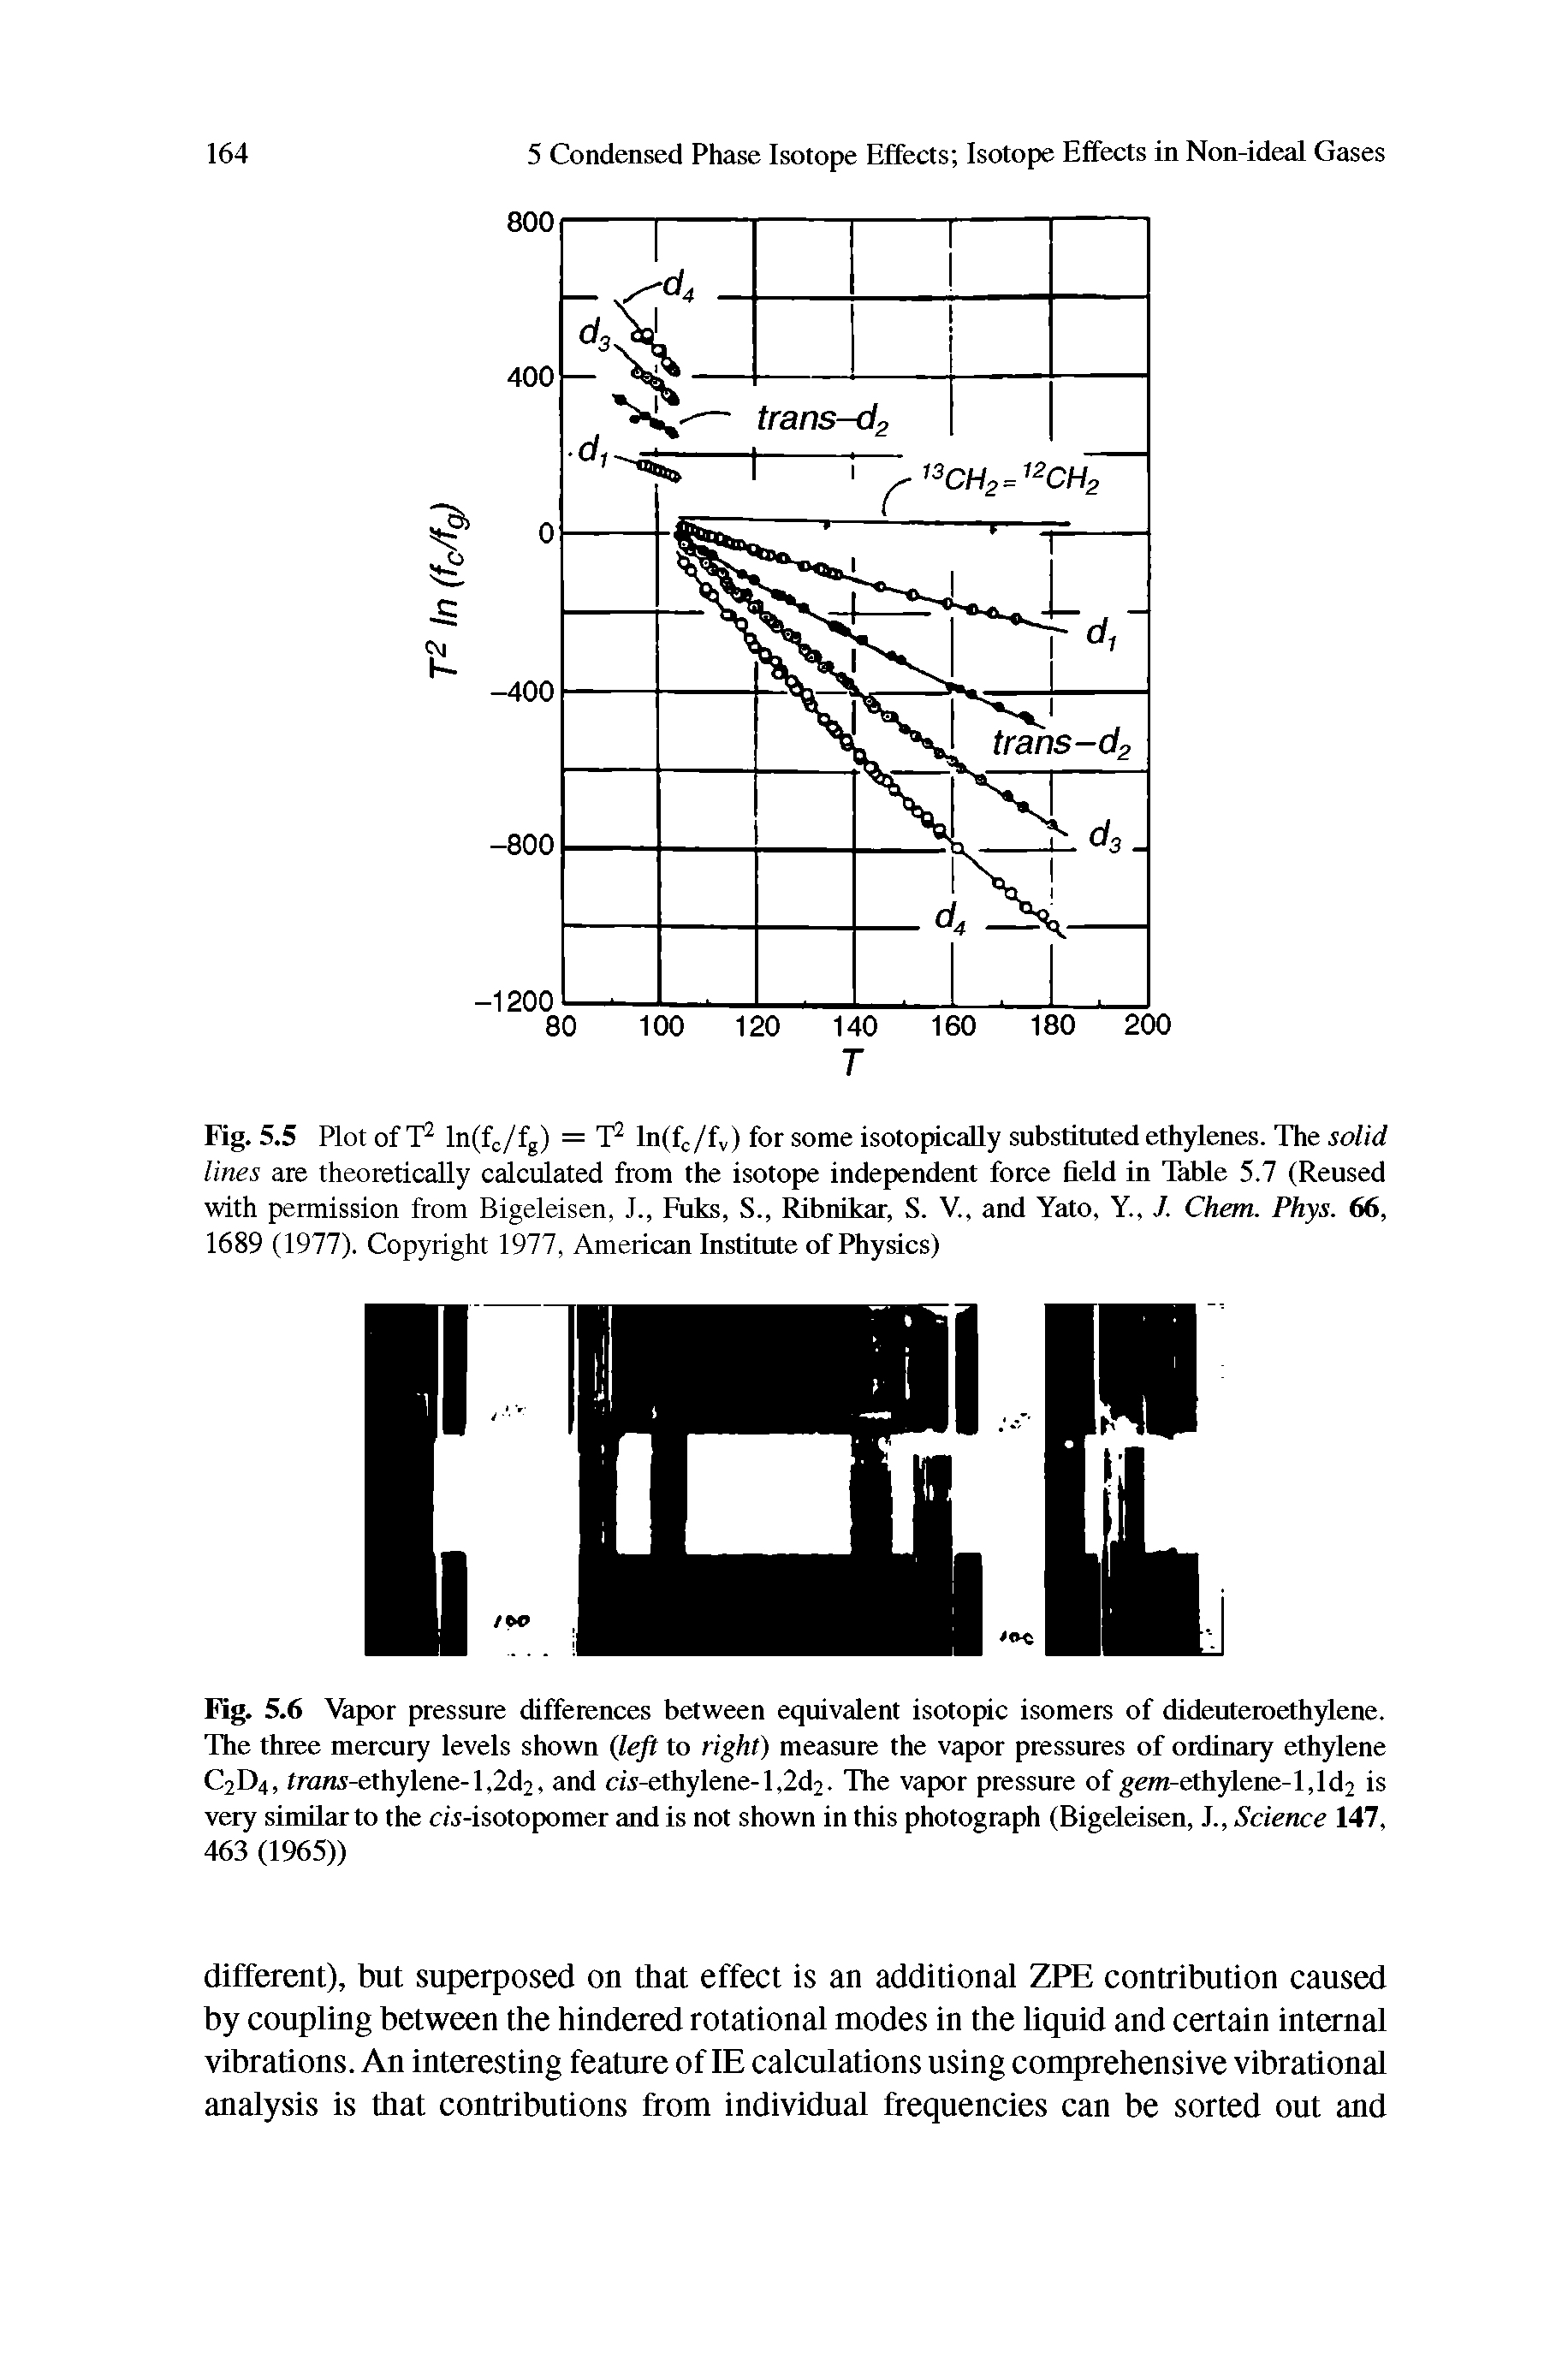 Fig. 5.6 Vapor pressure differences between equivalent isotopic isomers of dideuteroethylene. The three mercury levels shown (left to right) measure the vapor pressures of ordinary ethylene C2D4, /ram-ethylene-1,2dj, and ei.v-cthylene- l dj. The vapor pressure of gem-ethylene-1,ld2 is very similar to the cis-isotopomer and is not shown in this photograph (Bigeleisen, J., Science 147, 463 (1965))...